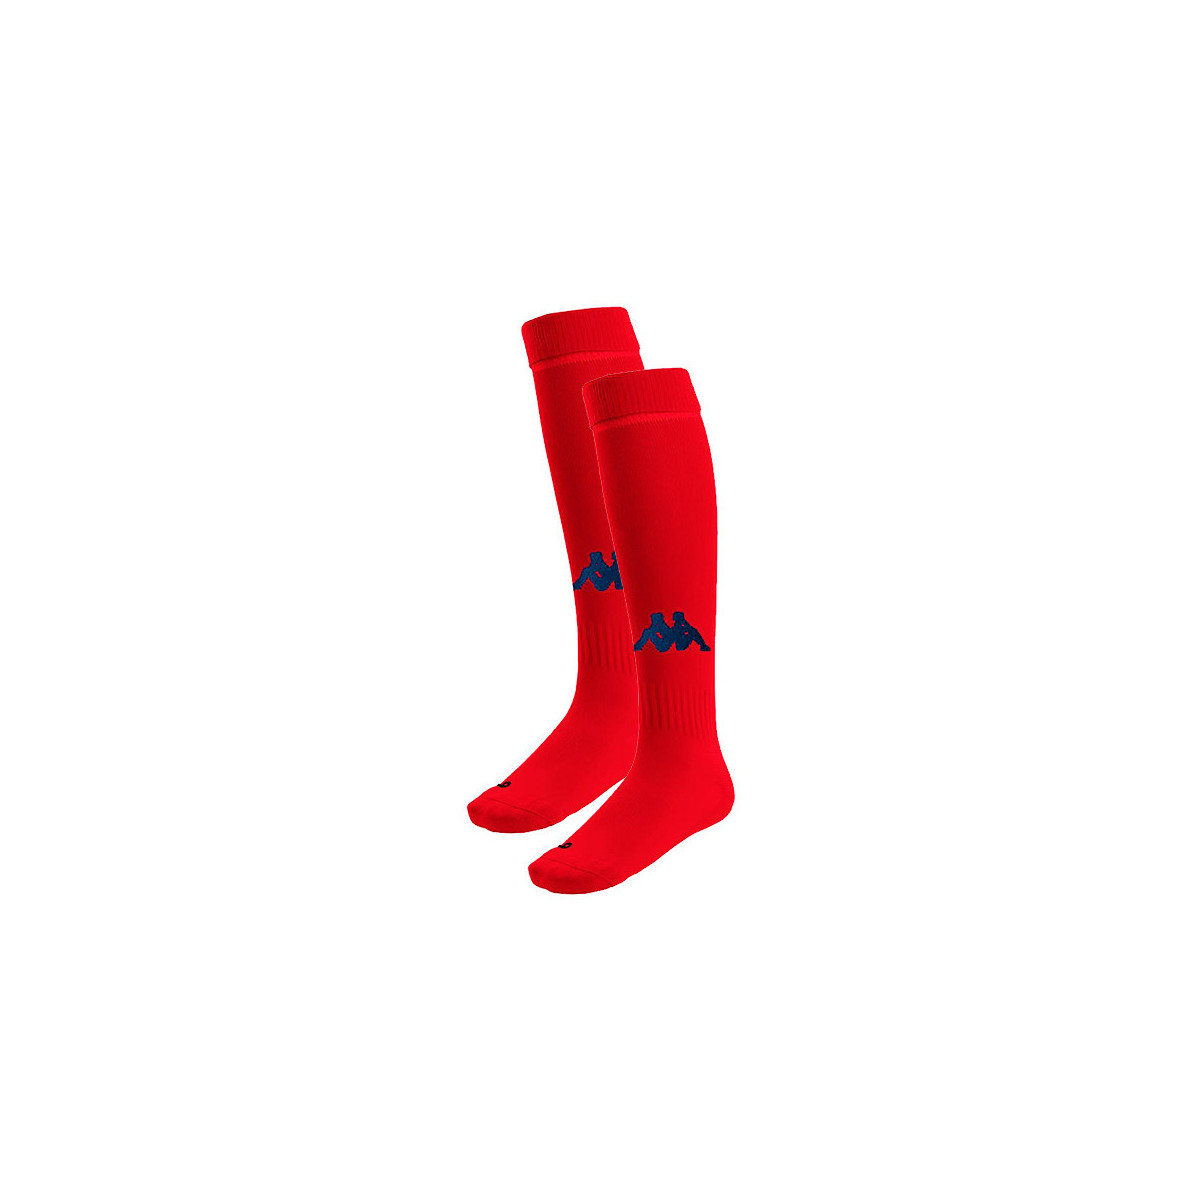 Kappa Rouge Chaussettes Penao (3 paires) eQmUbZii